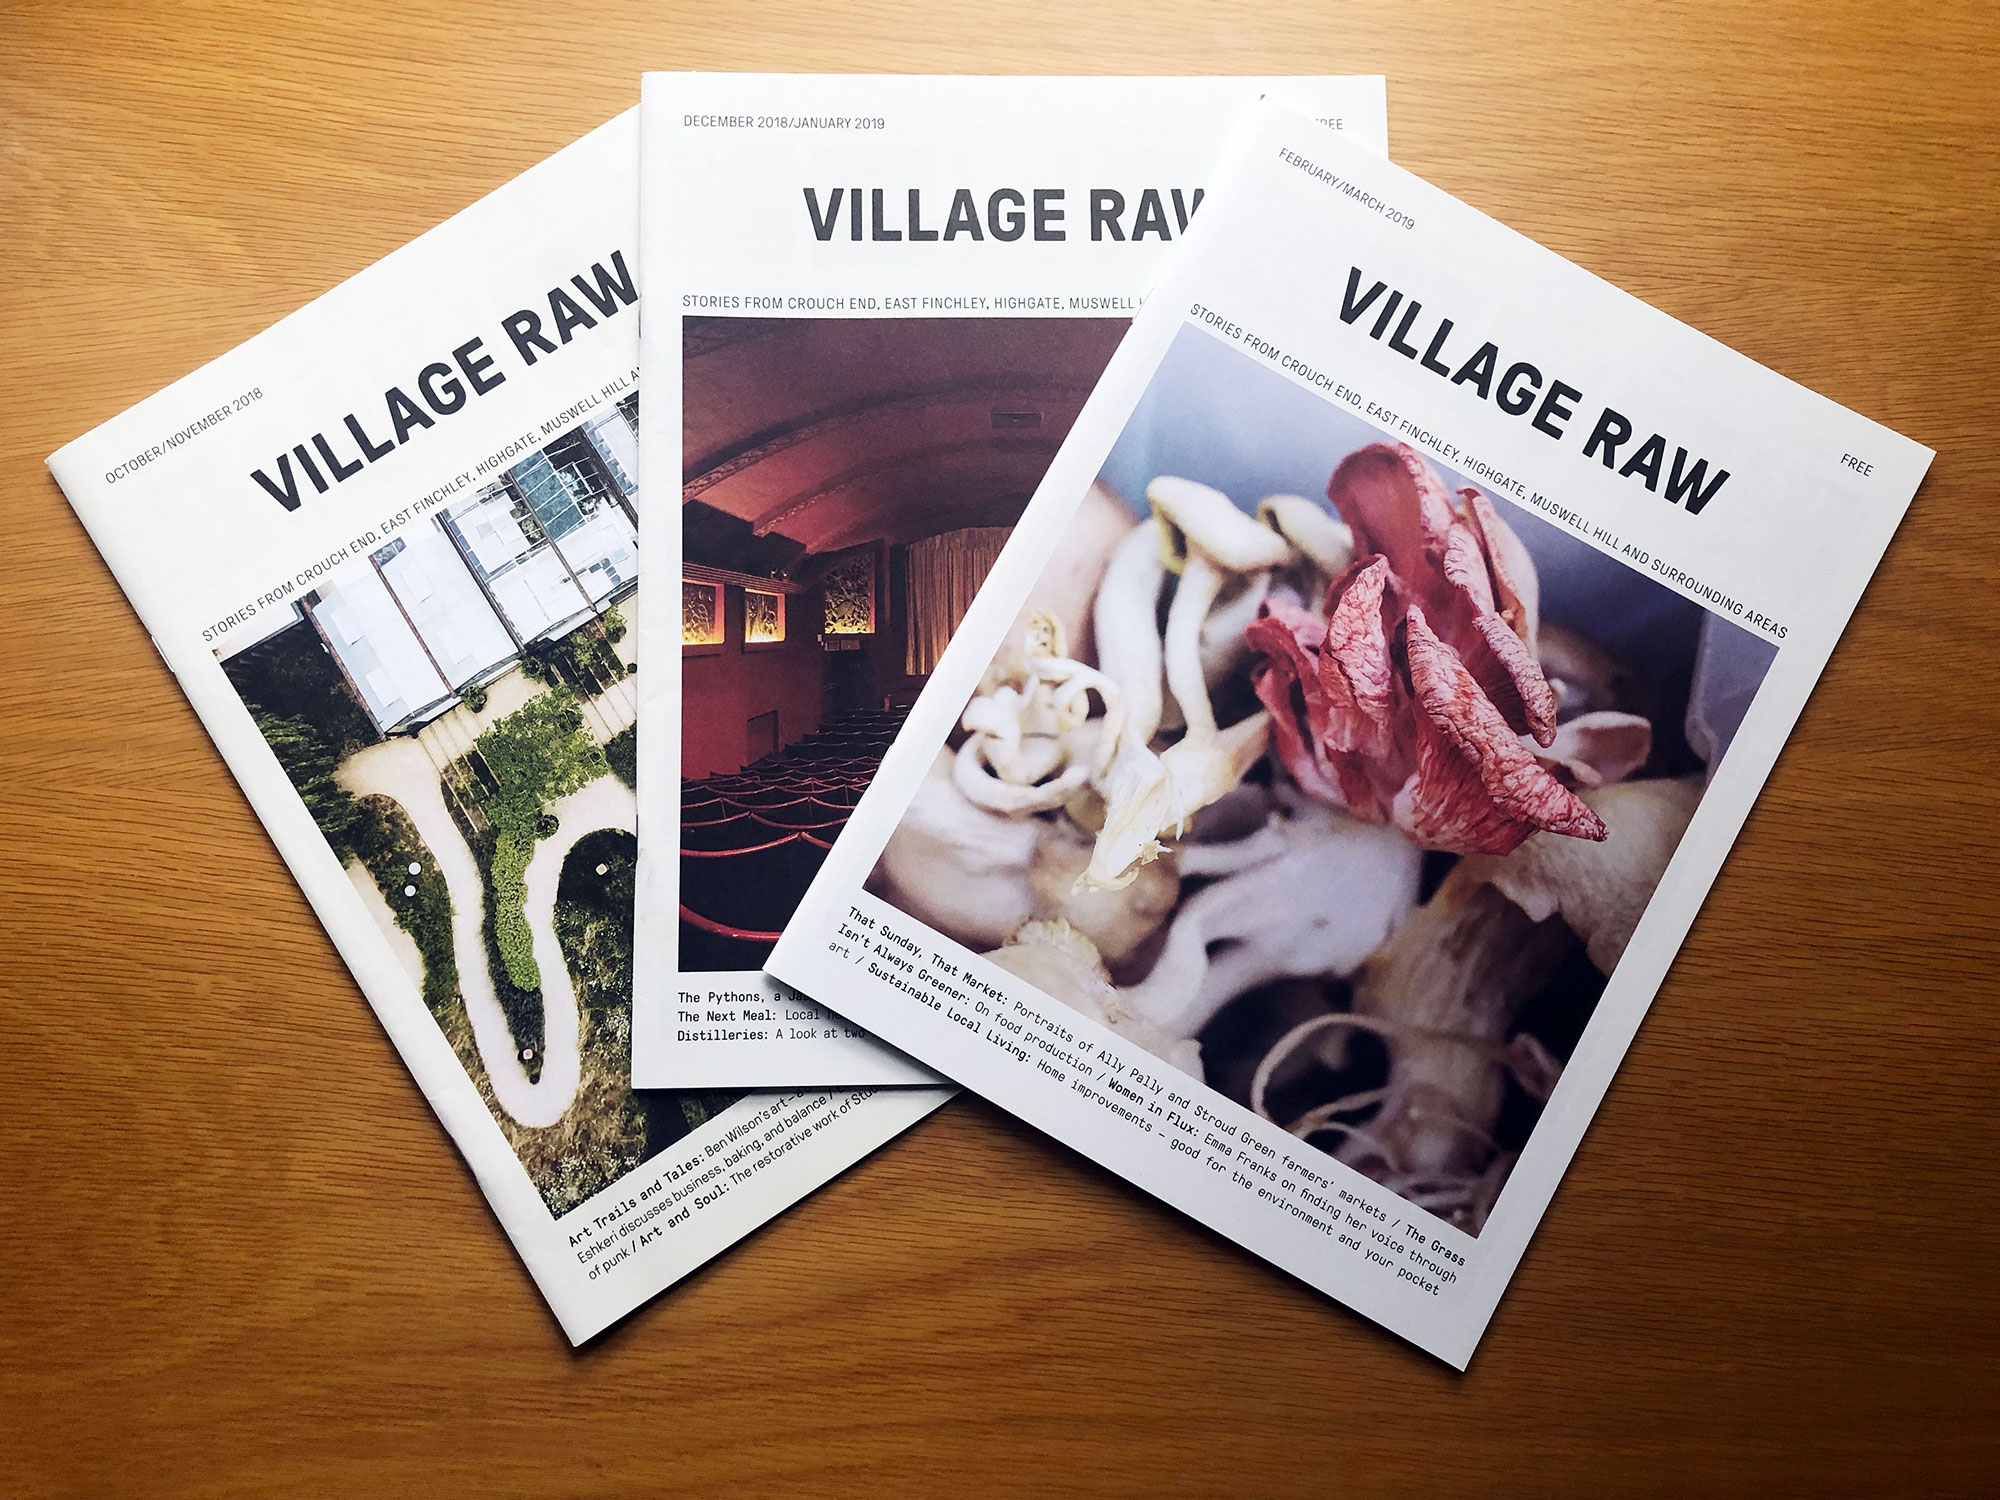 Village Raw magazine, published and distributed in North London